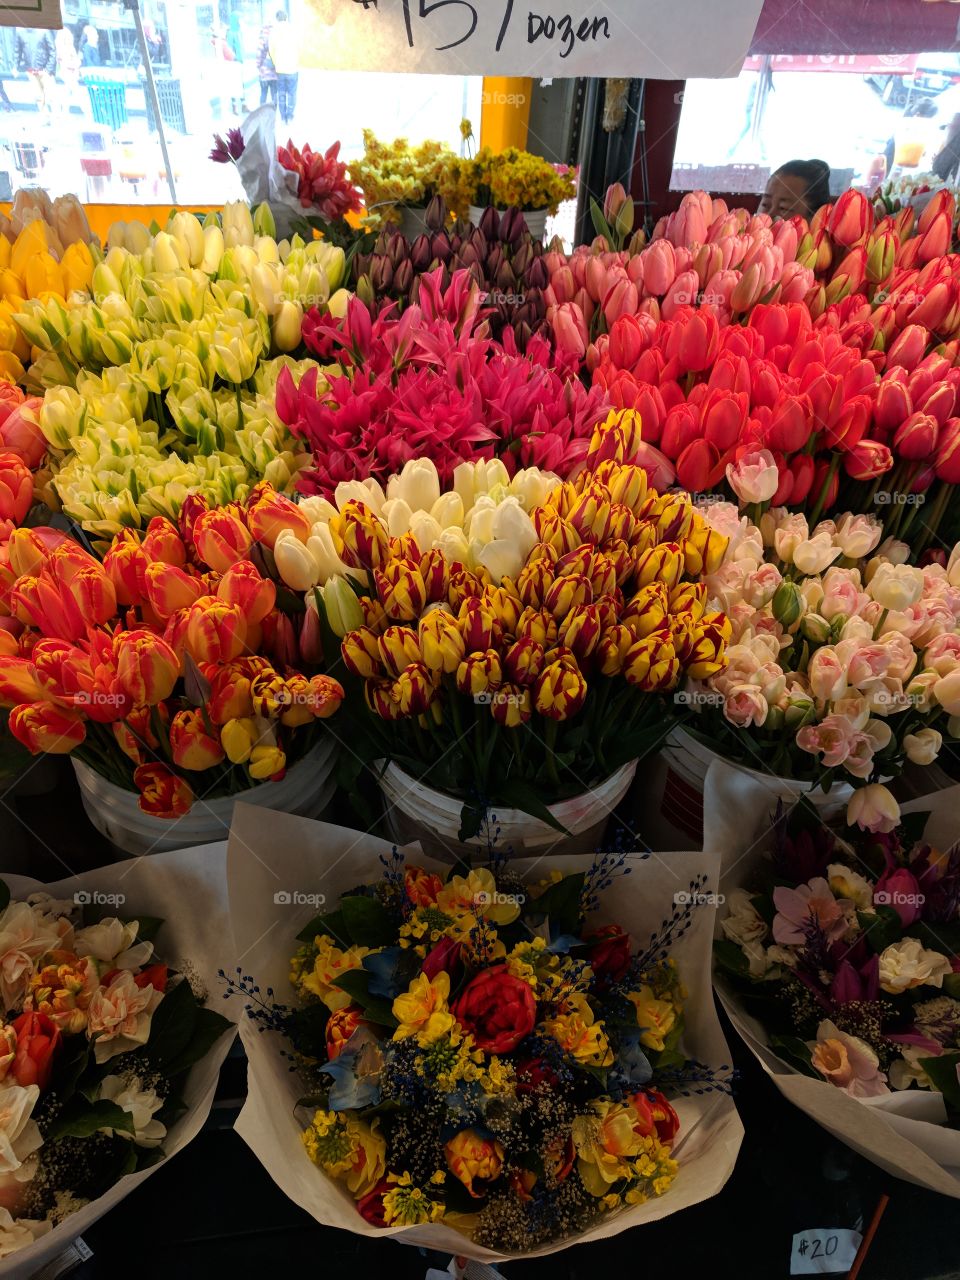 Delicate tulips, and flower arrangements. Vast numbers of bouquets available at farmer's market in Seattle, Washington.